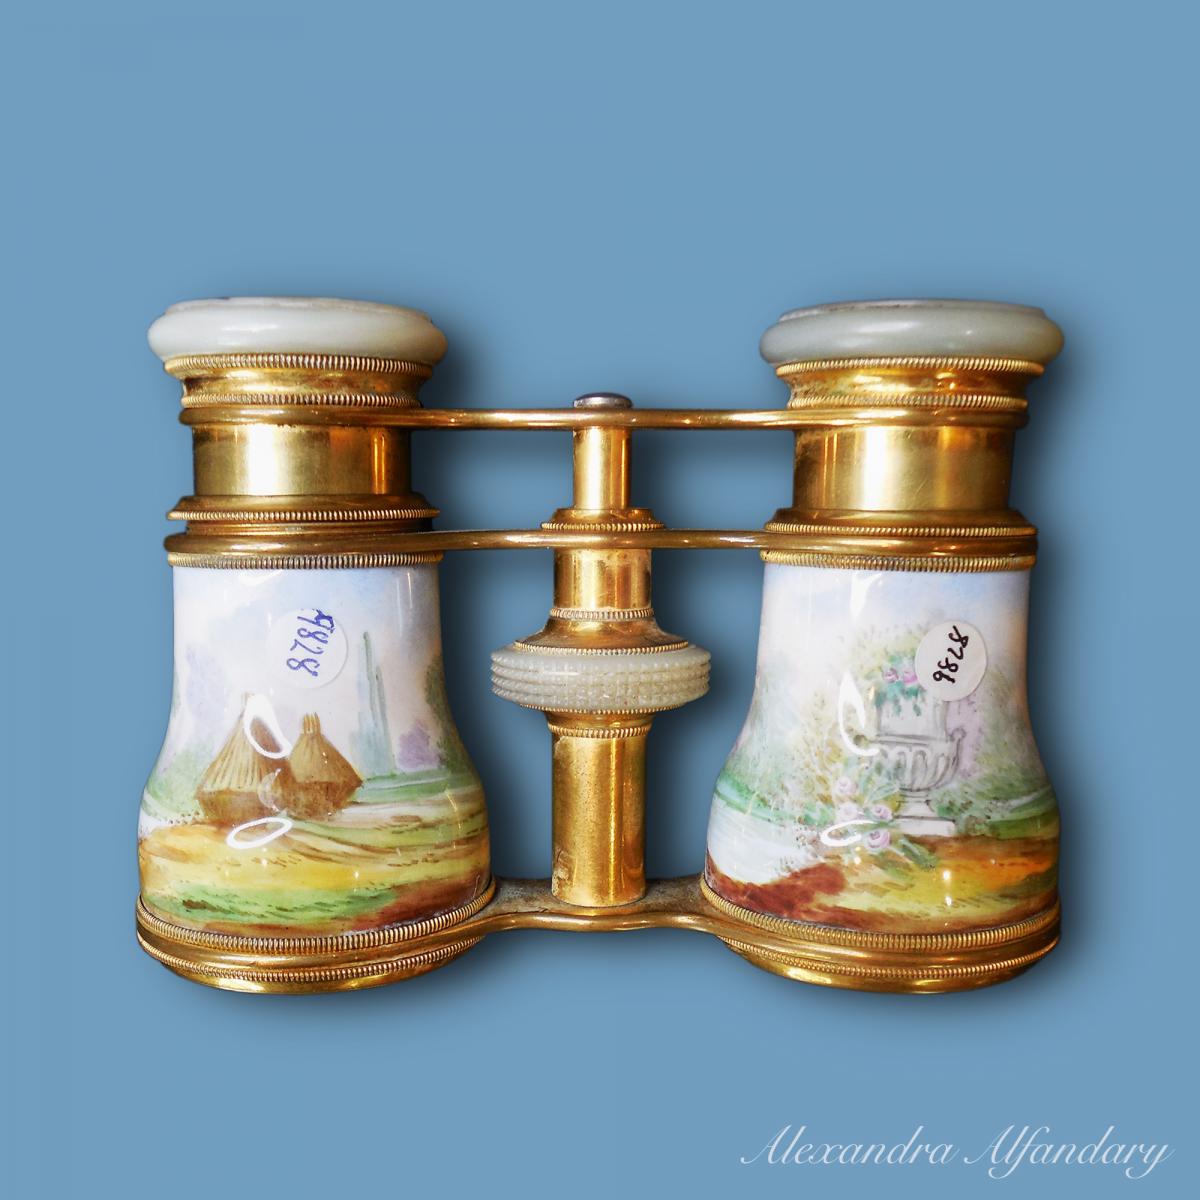 A Pair of Good French Enamel Opera Glasses